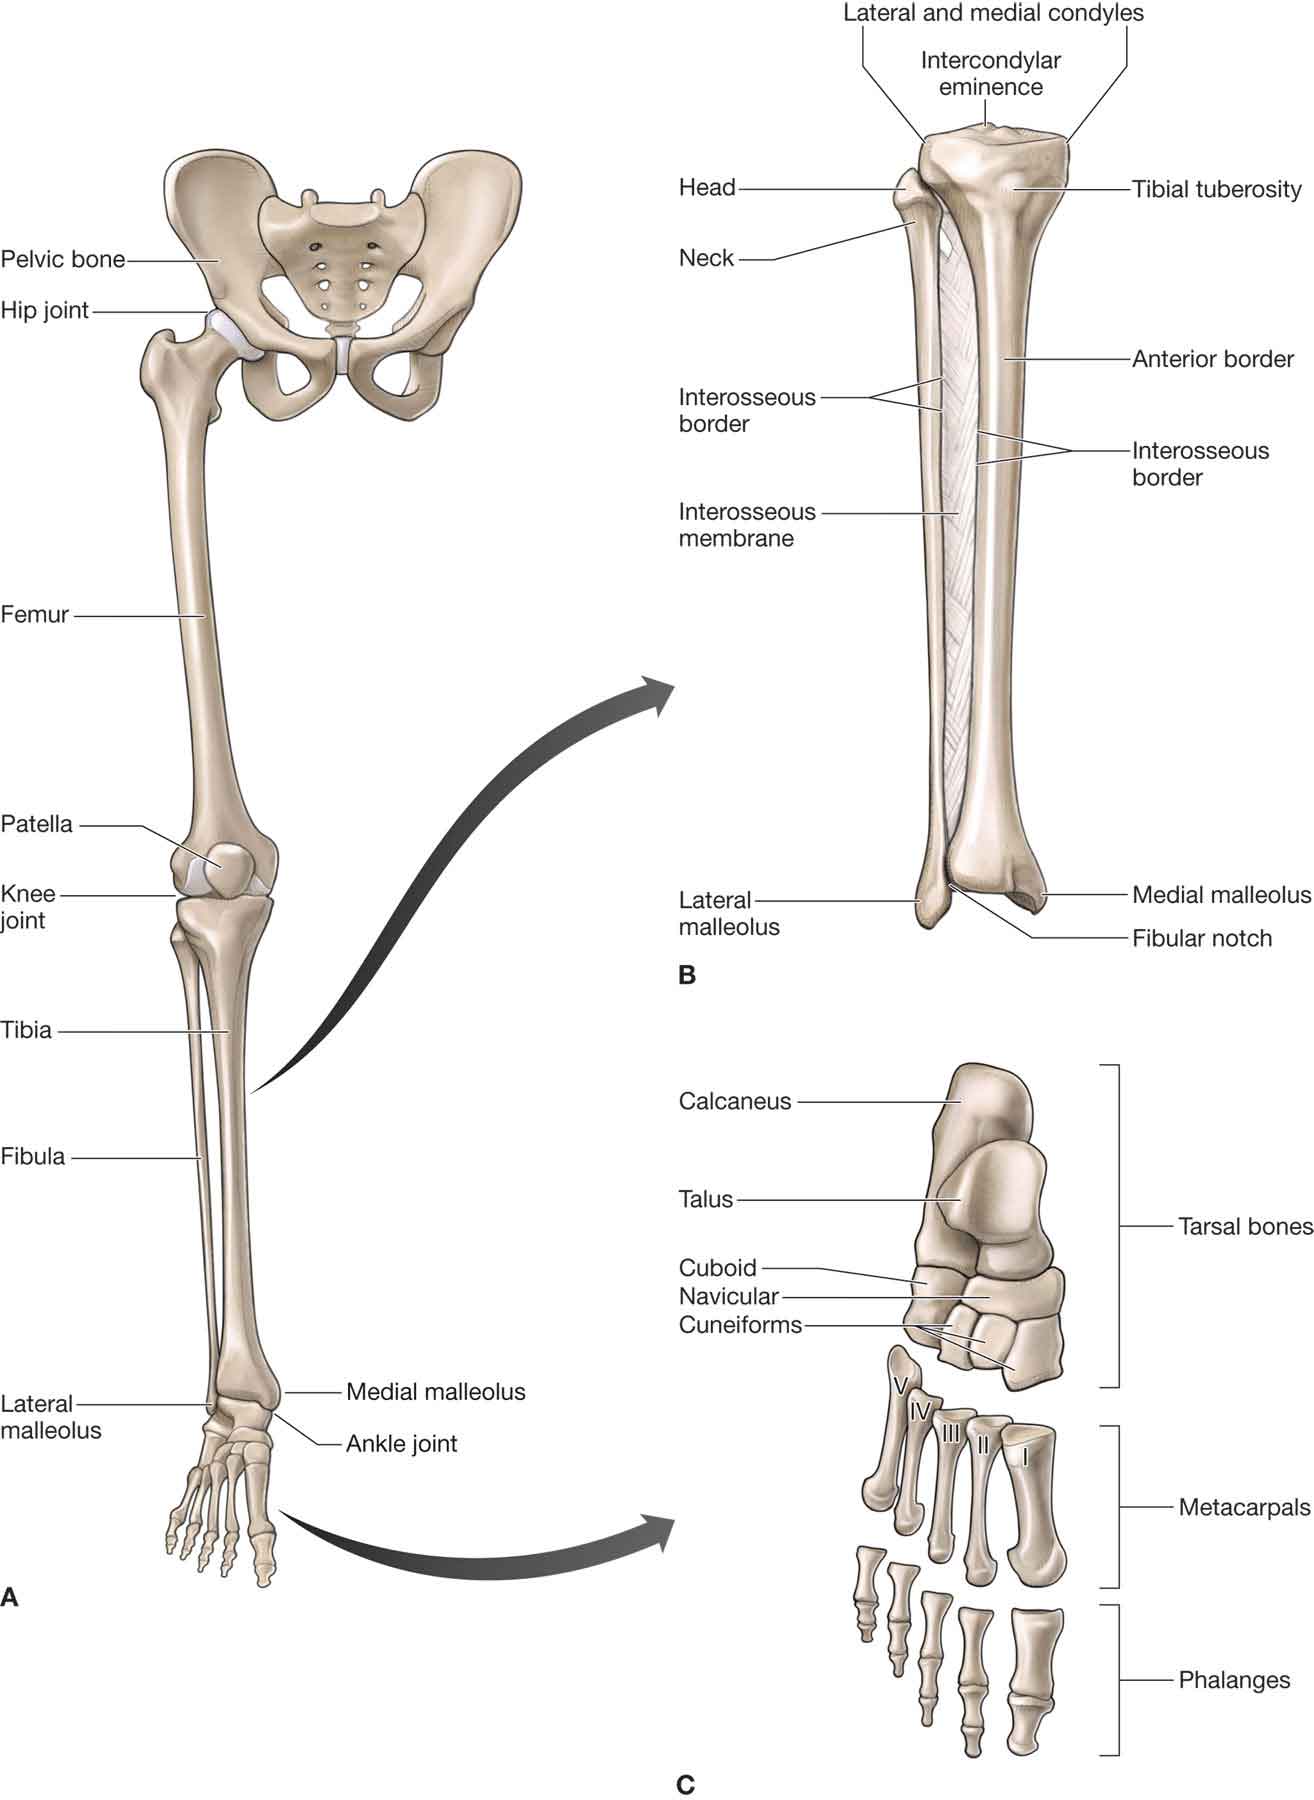 Lower Leg, Ankle, and Foot | Musculoskeletal Key